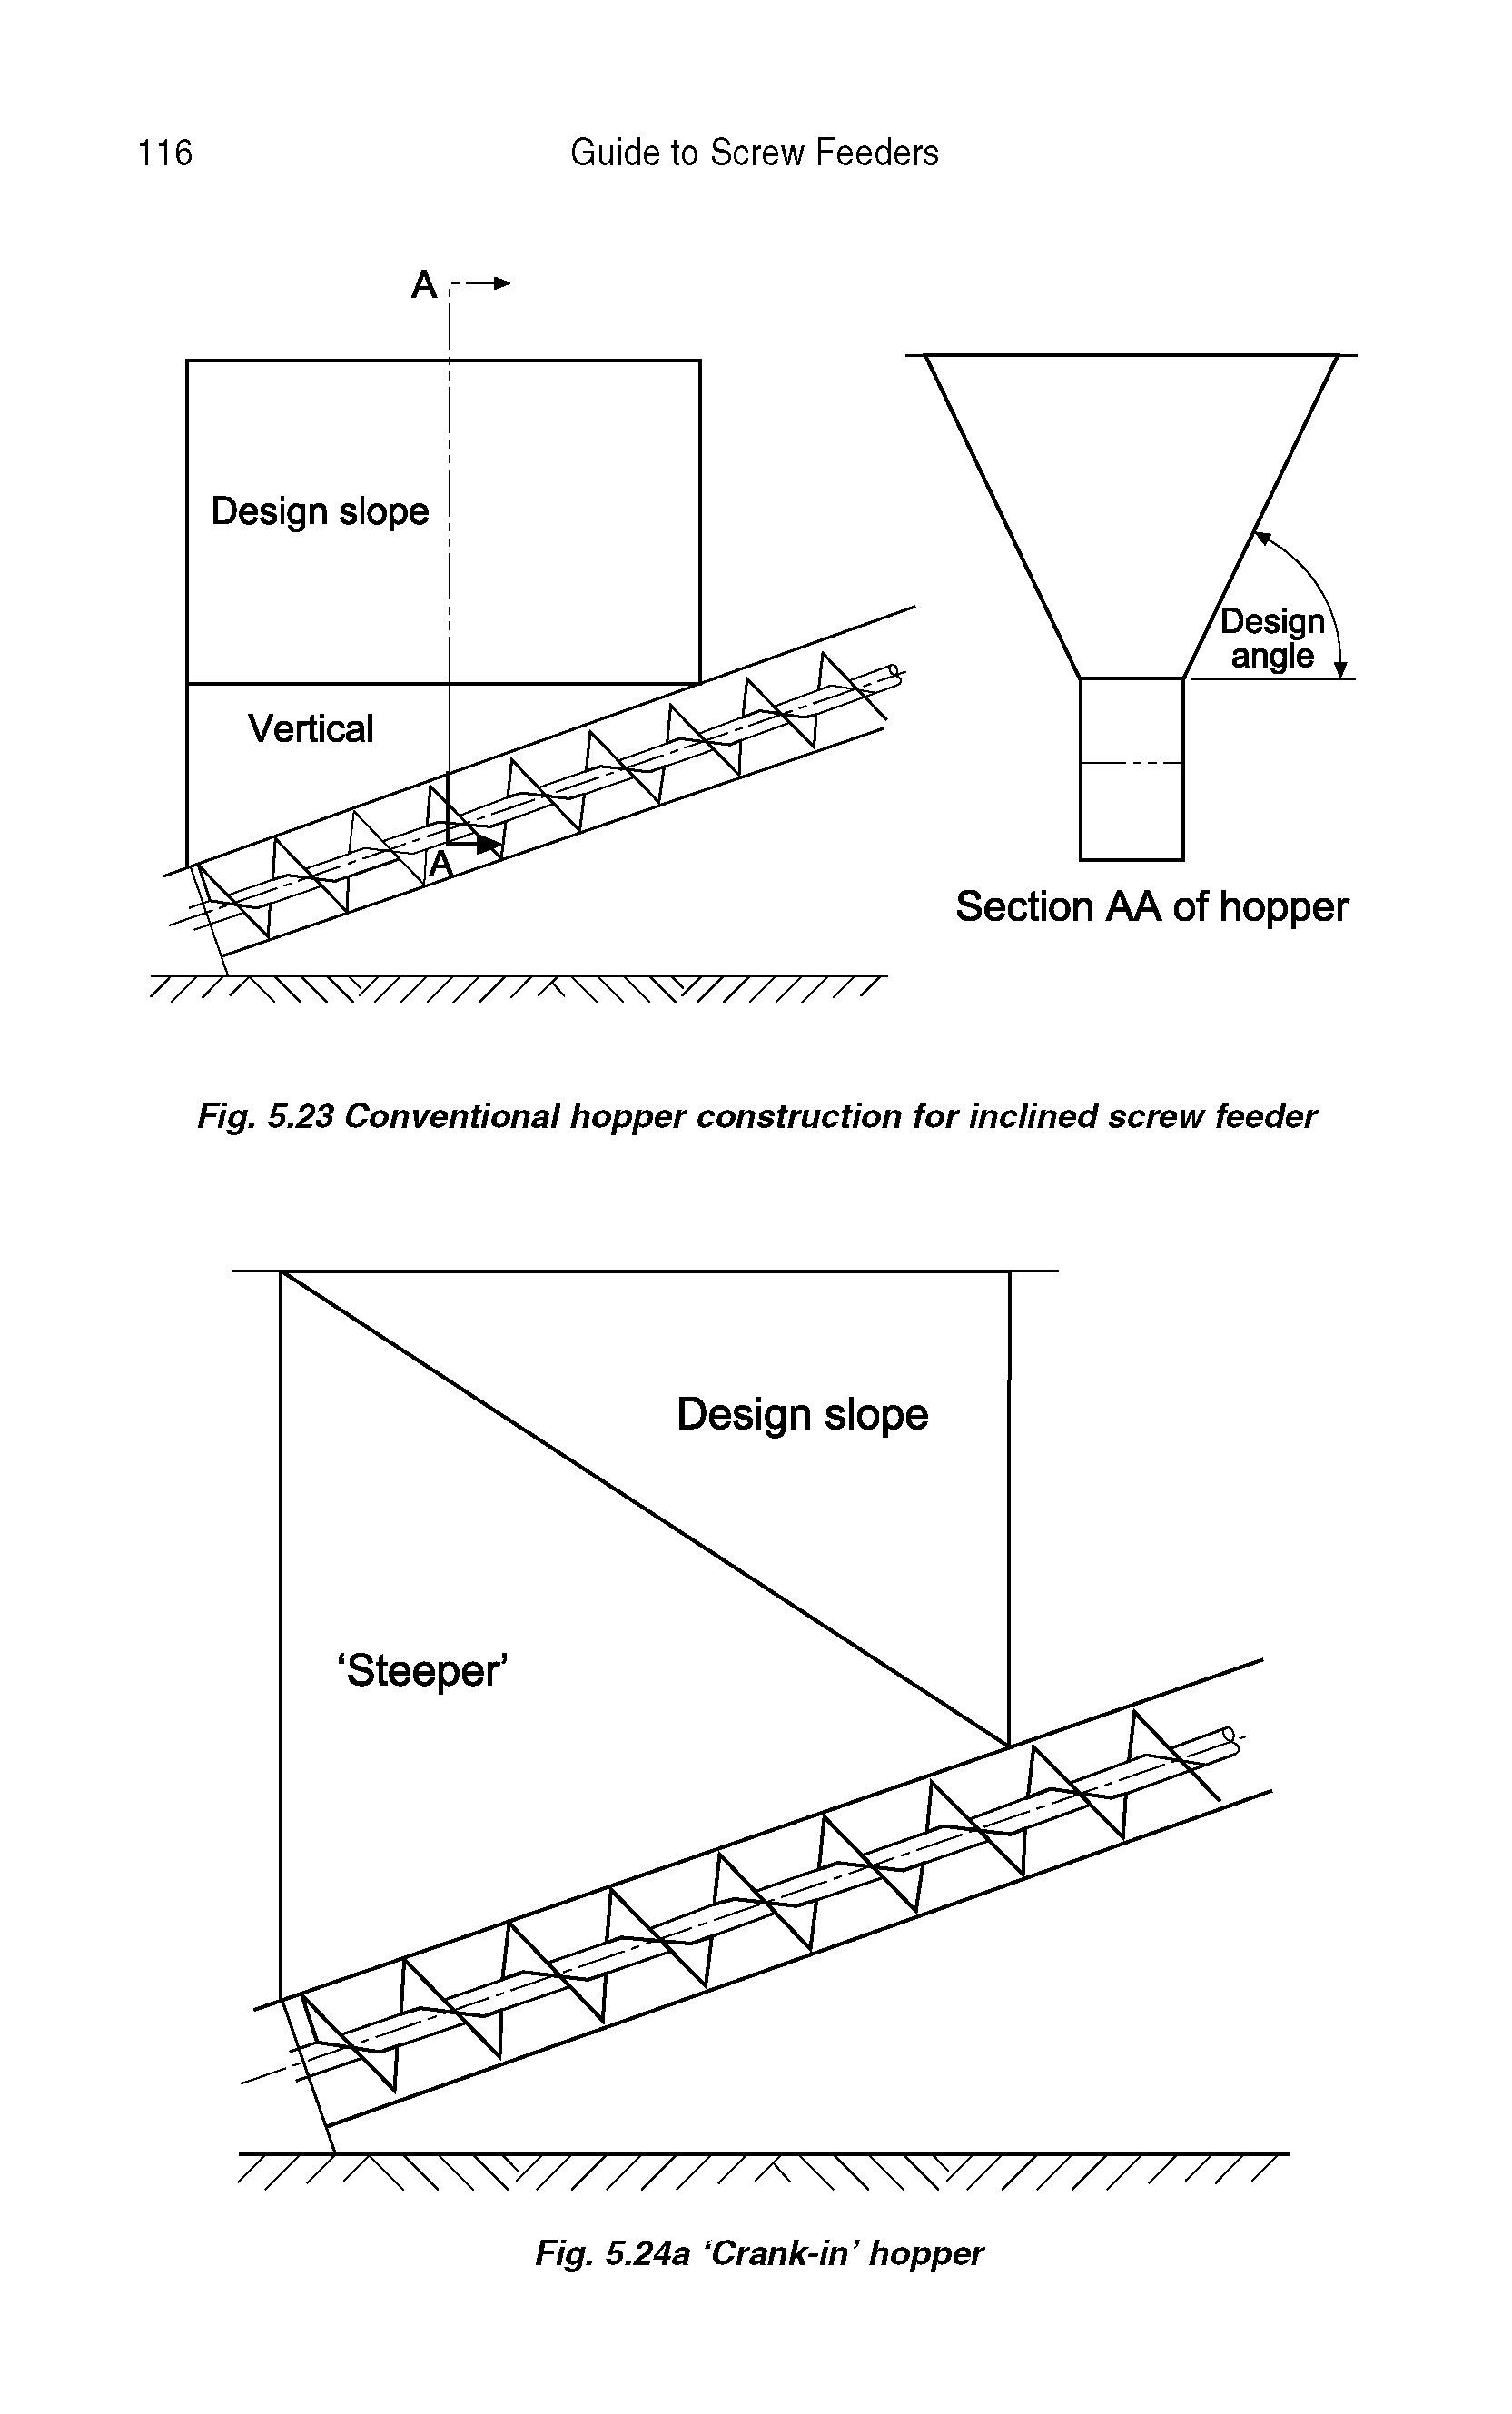 Fig. 5.23 Conventional hopper construction for inclined screw feeder...